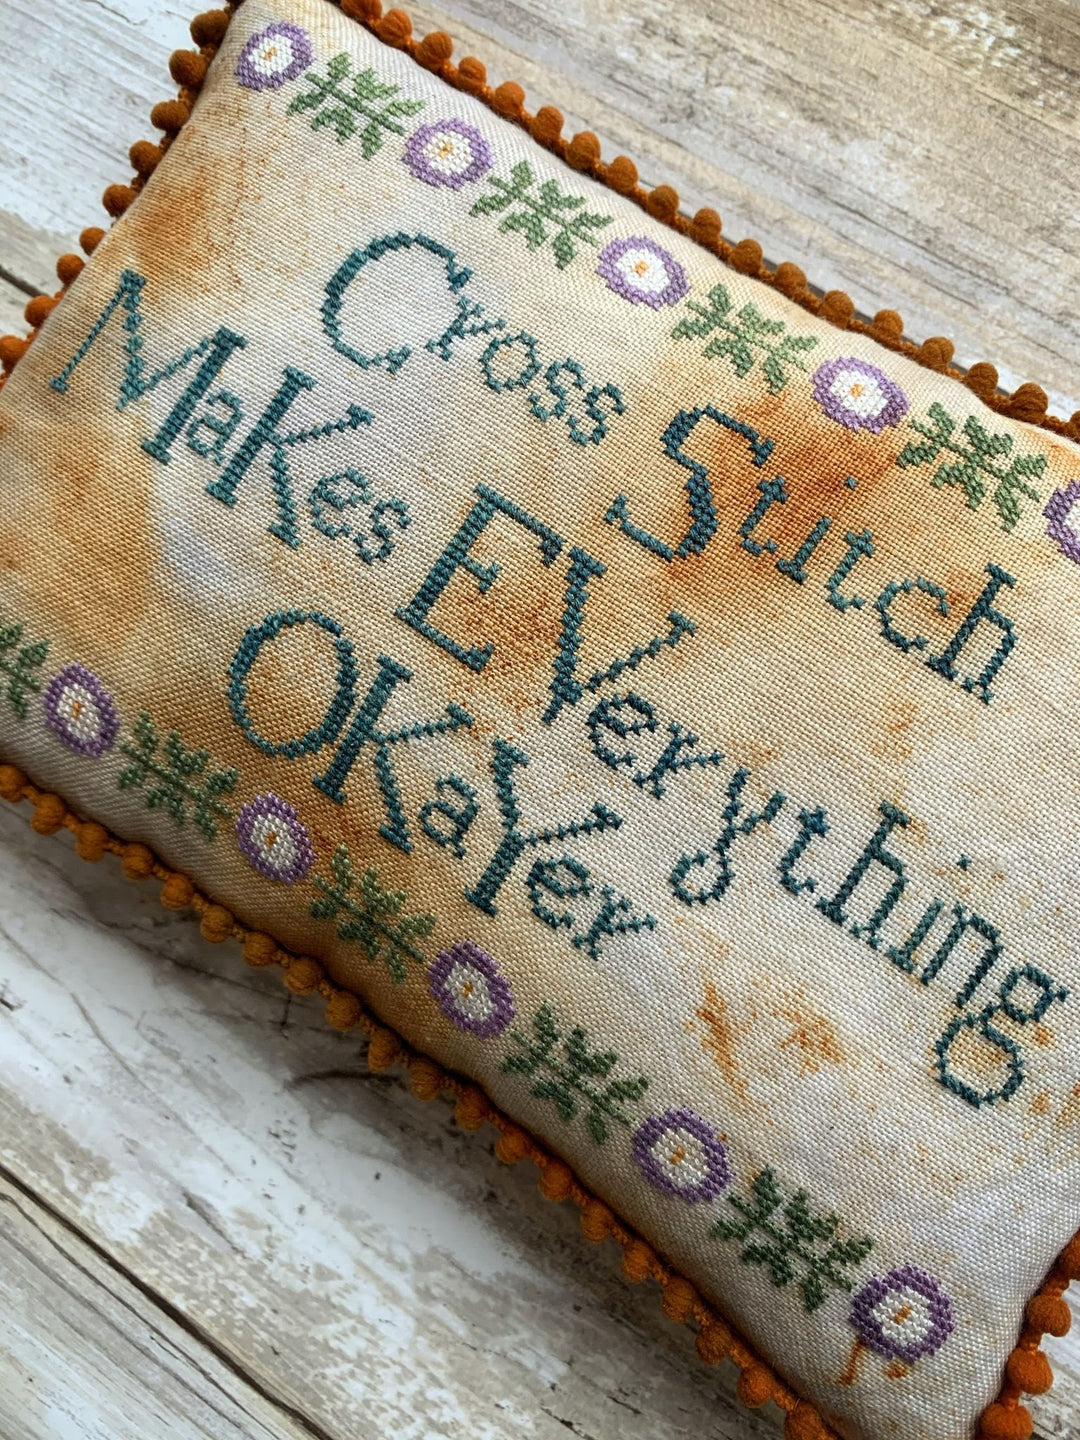 Cross Stitch Makes Everything Okayer | Lucy Beam